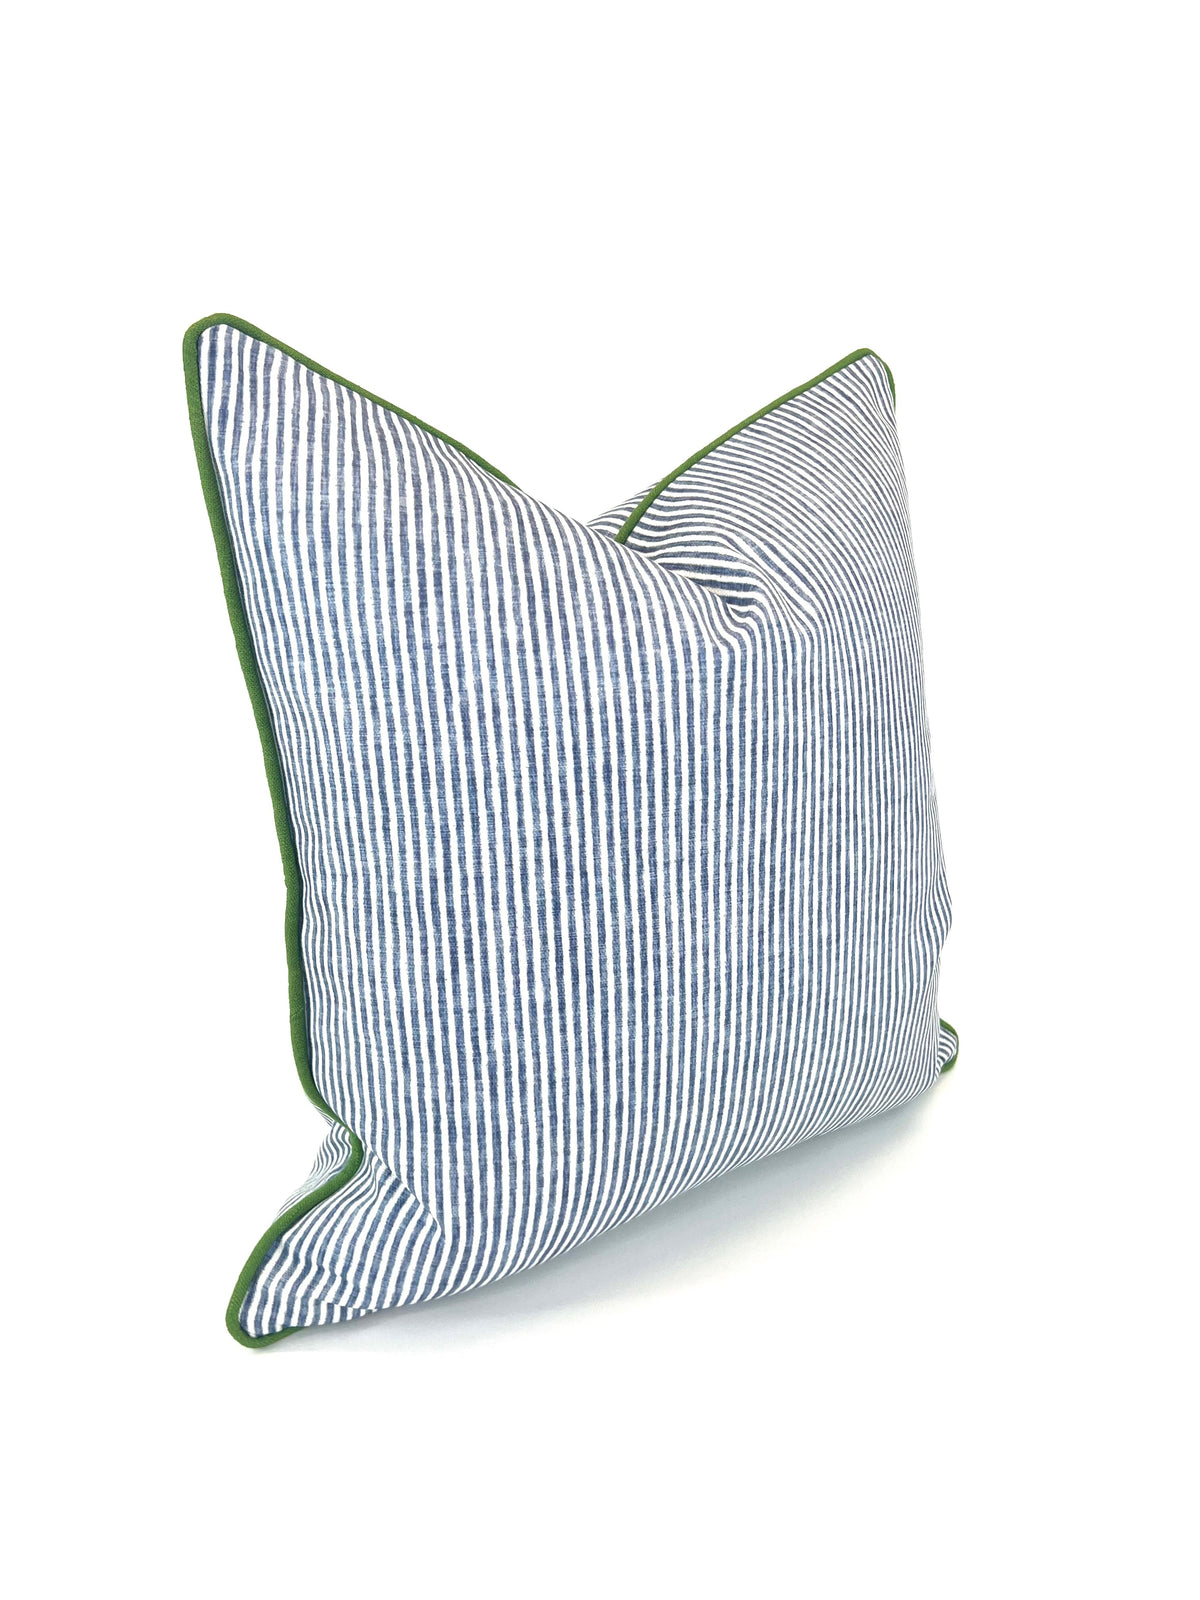 Ticking Dusty Blue & White in Kelly Green Welt/Piping Decorative Pillow Cover - Multiple Colors